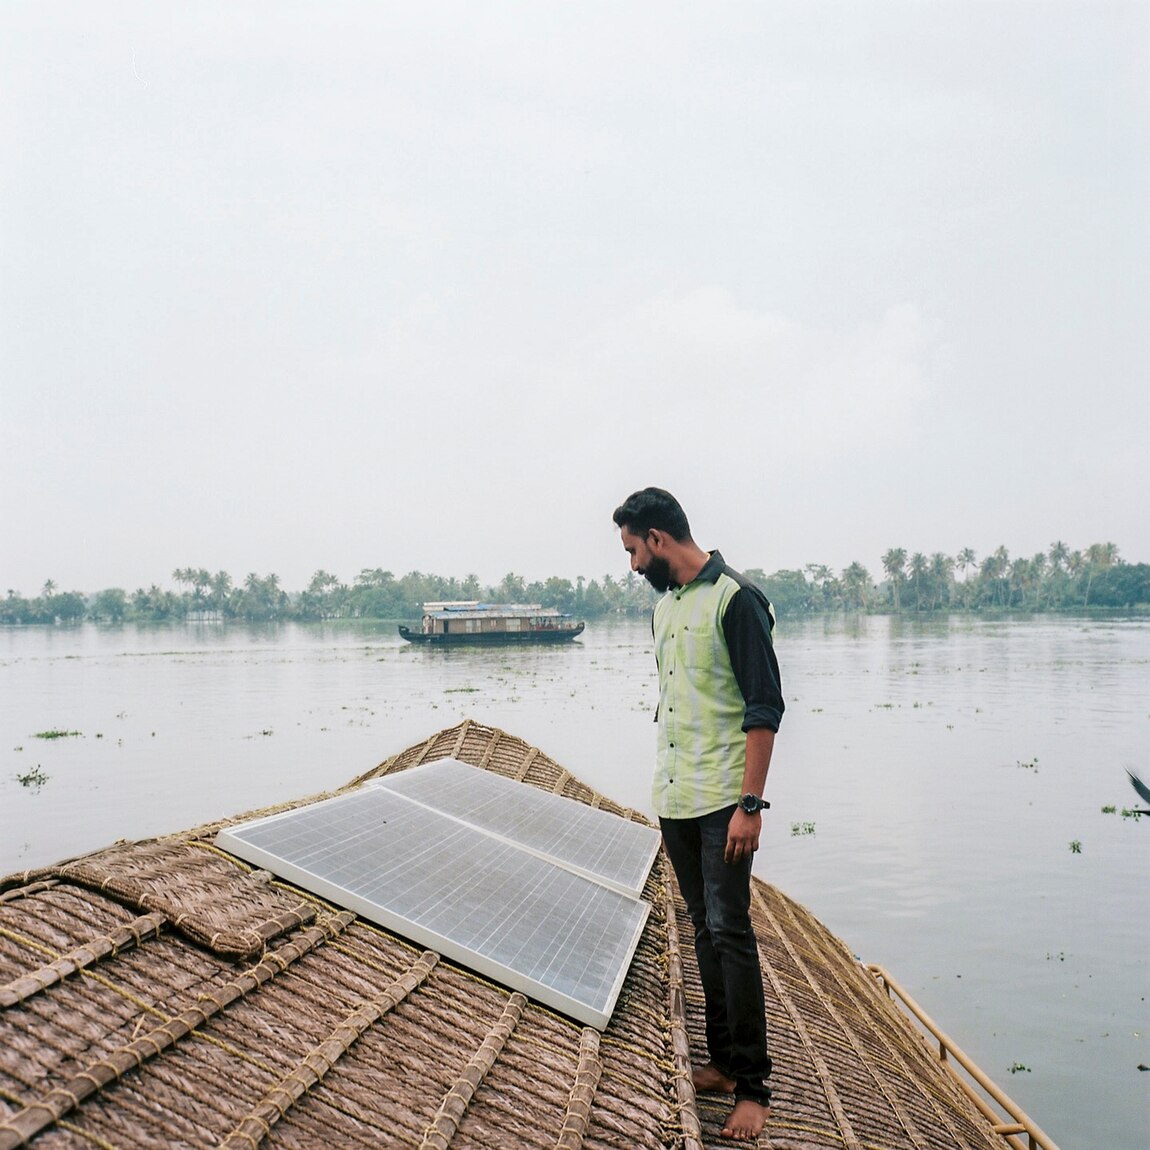 Vineeth Joseph installed solar panels on his Kerala houseboat four years ago. He paid 70,000 rupees (around $920) and has recouped his costs over two years. However, going fully solar powered would be a much larger investment that he cannot afford.